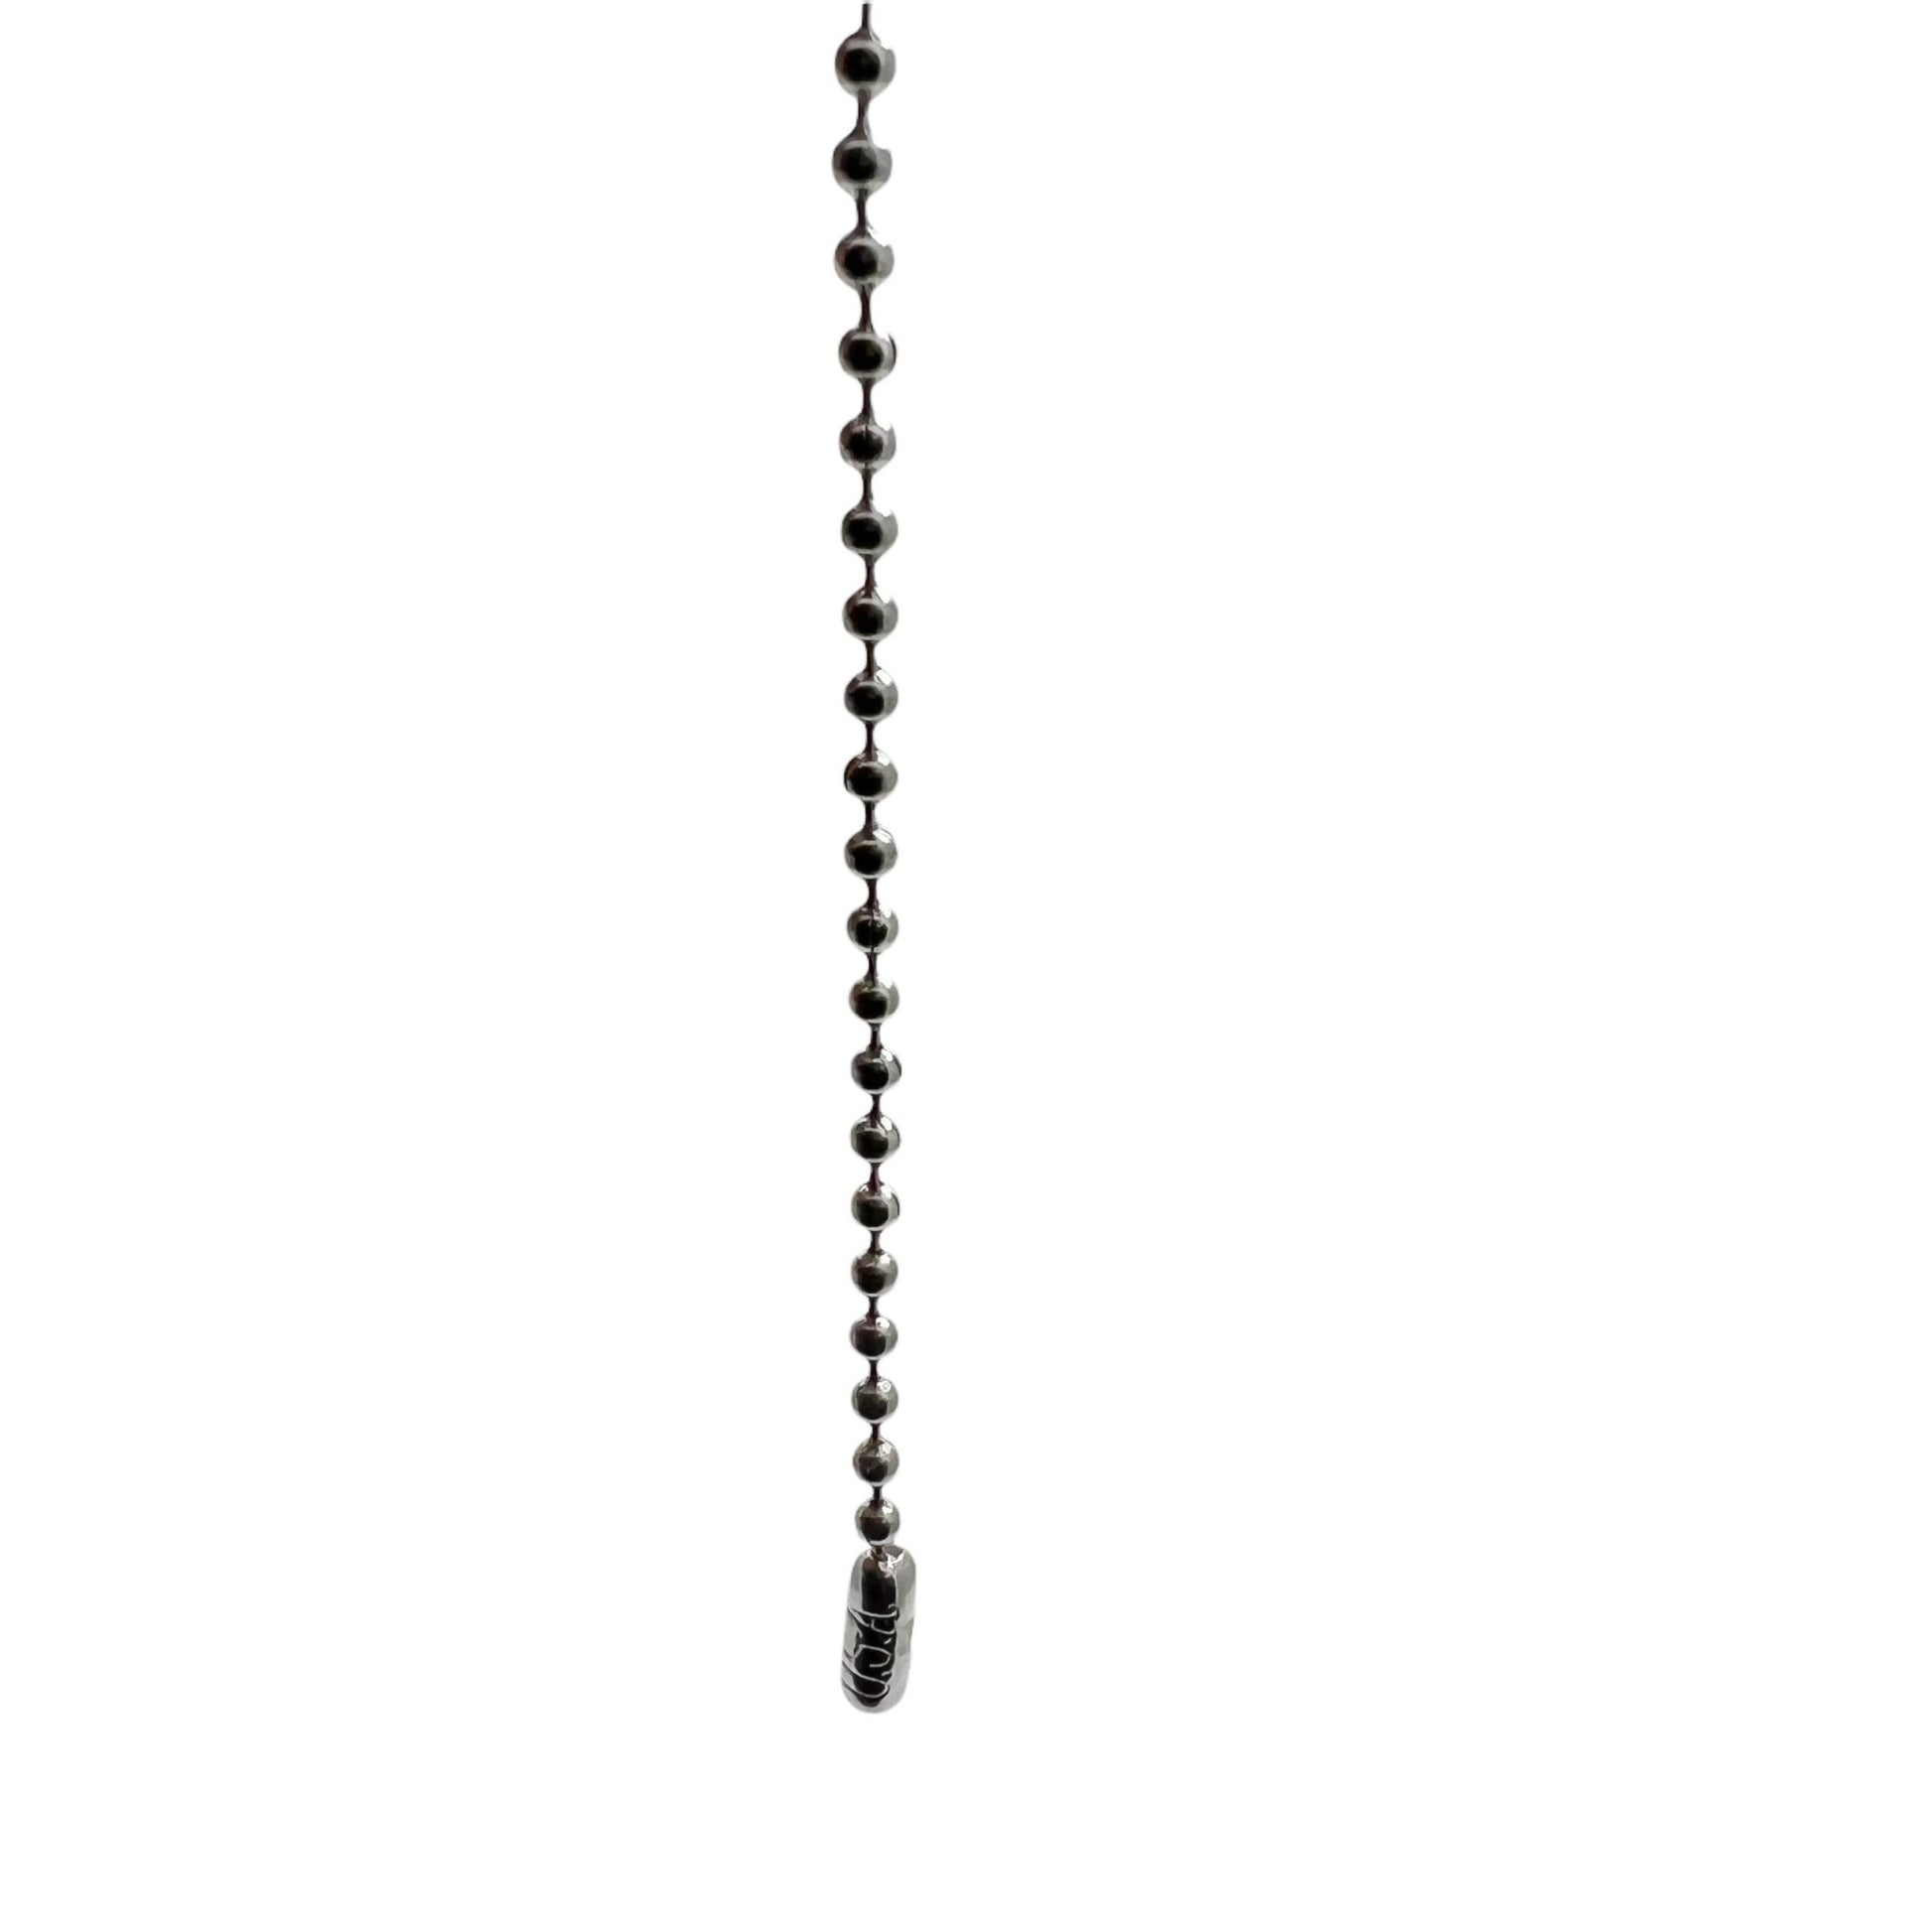 duhgbne ball bead chain stainless steel 33ft/10m beaded dog chain necklace chains  for jewelry making diy crafts silver metal small bead chain roll with 20pcs  